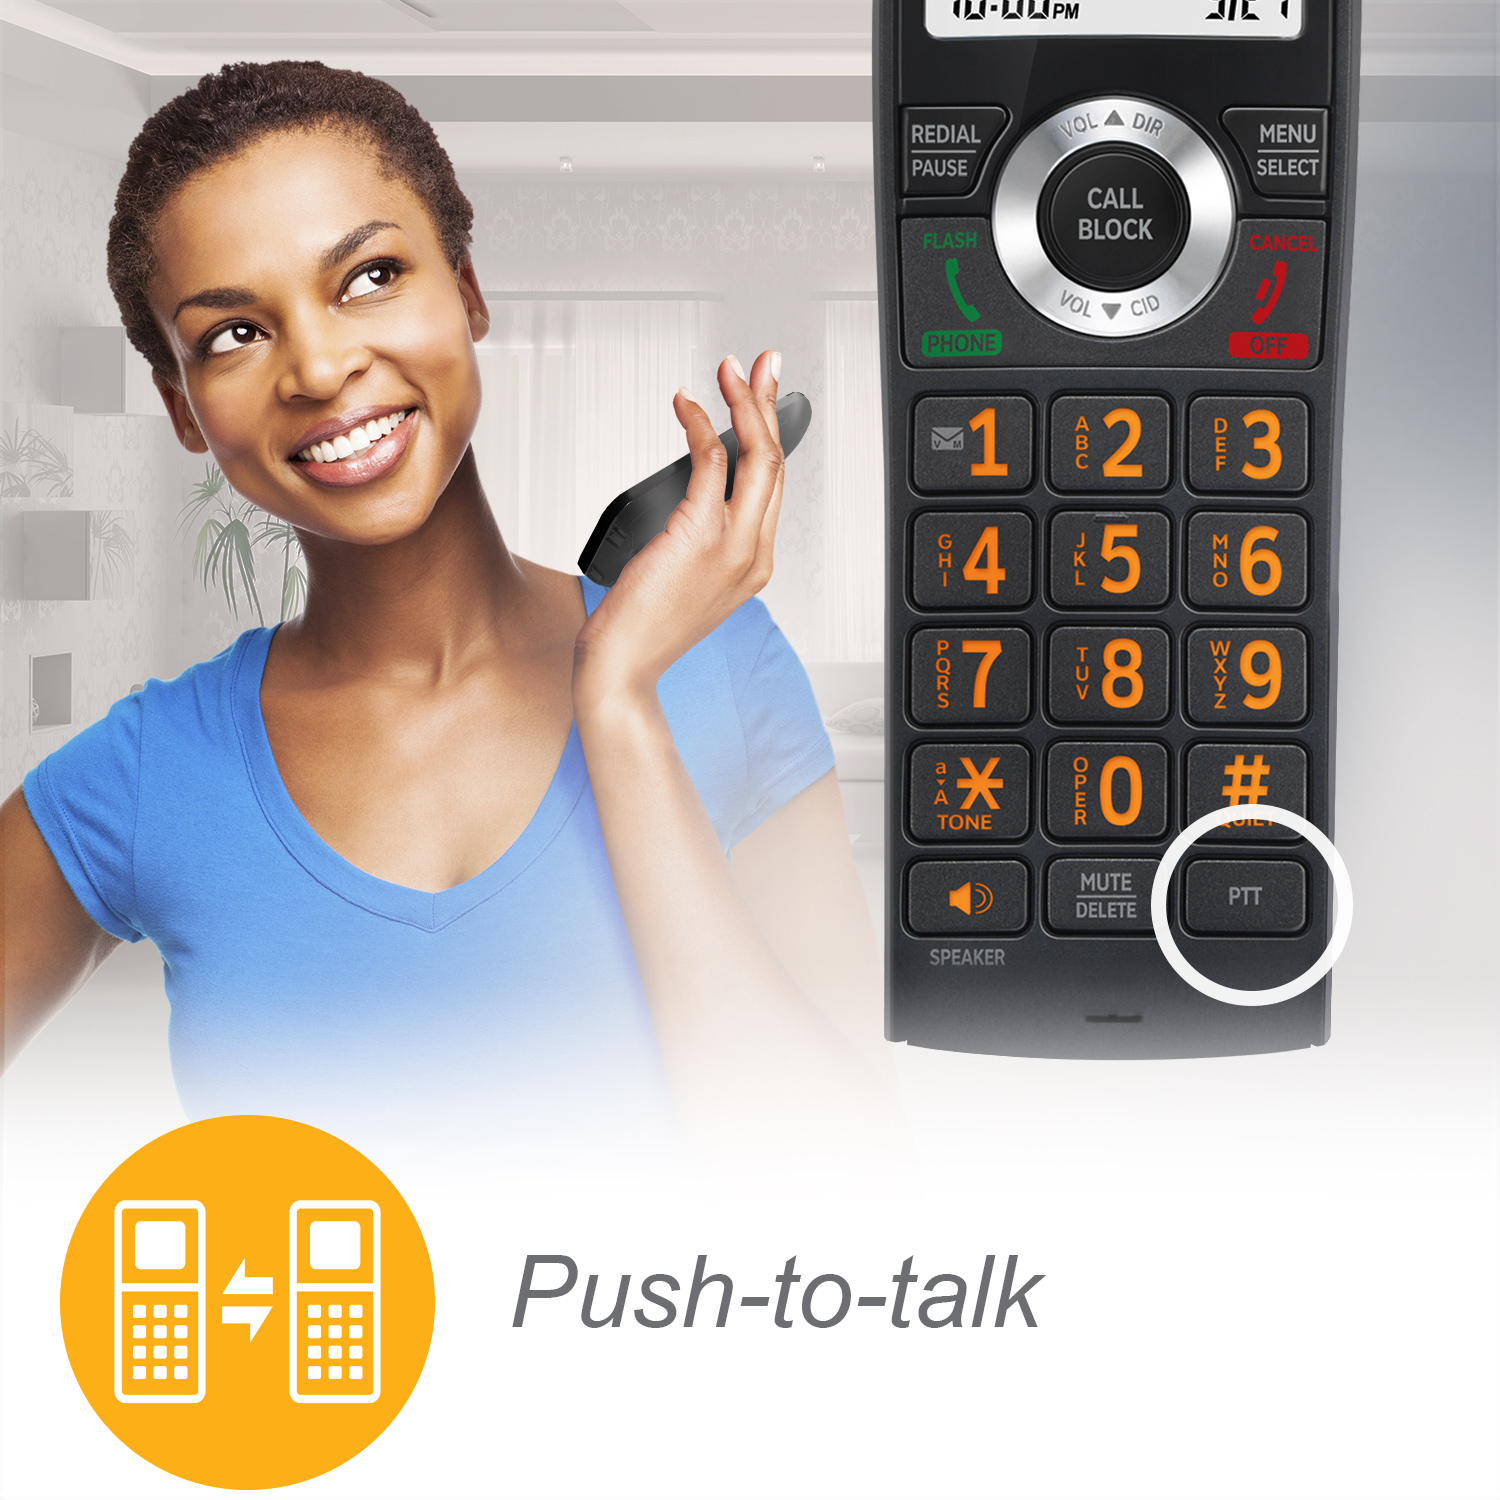 2-Handset Expandable Cordless Phone with Unsurpassed Range, Smart Call Blocker and Answering System - view 8